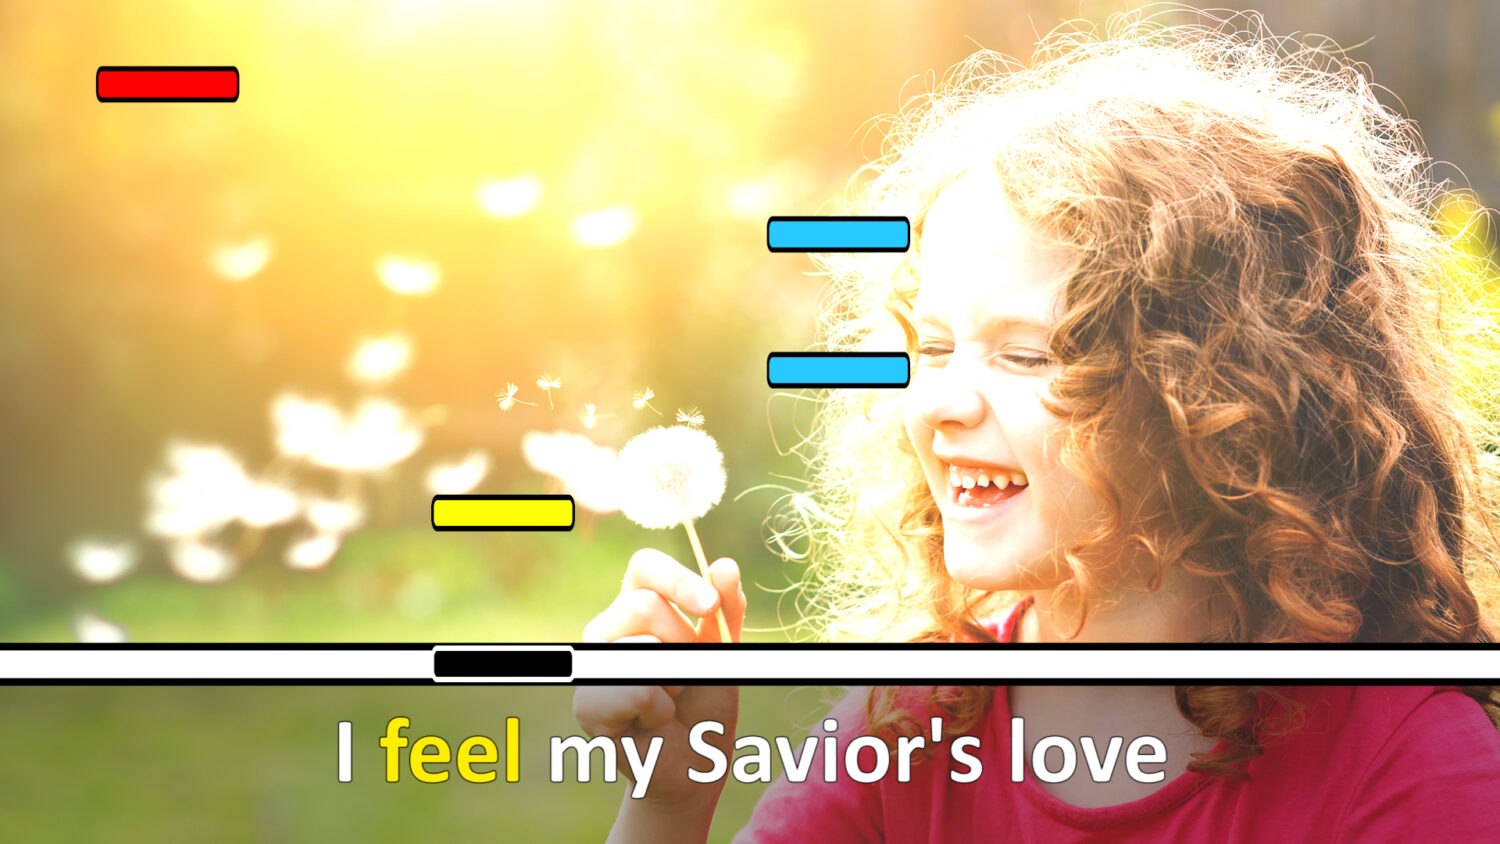 25 I Feel My Savior's Love Singing Time Ideas Singing time ideas for Primary Music Leaders M I FEEL MY SAVIORS LOVE